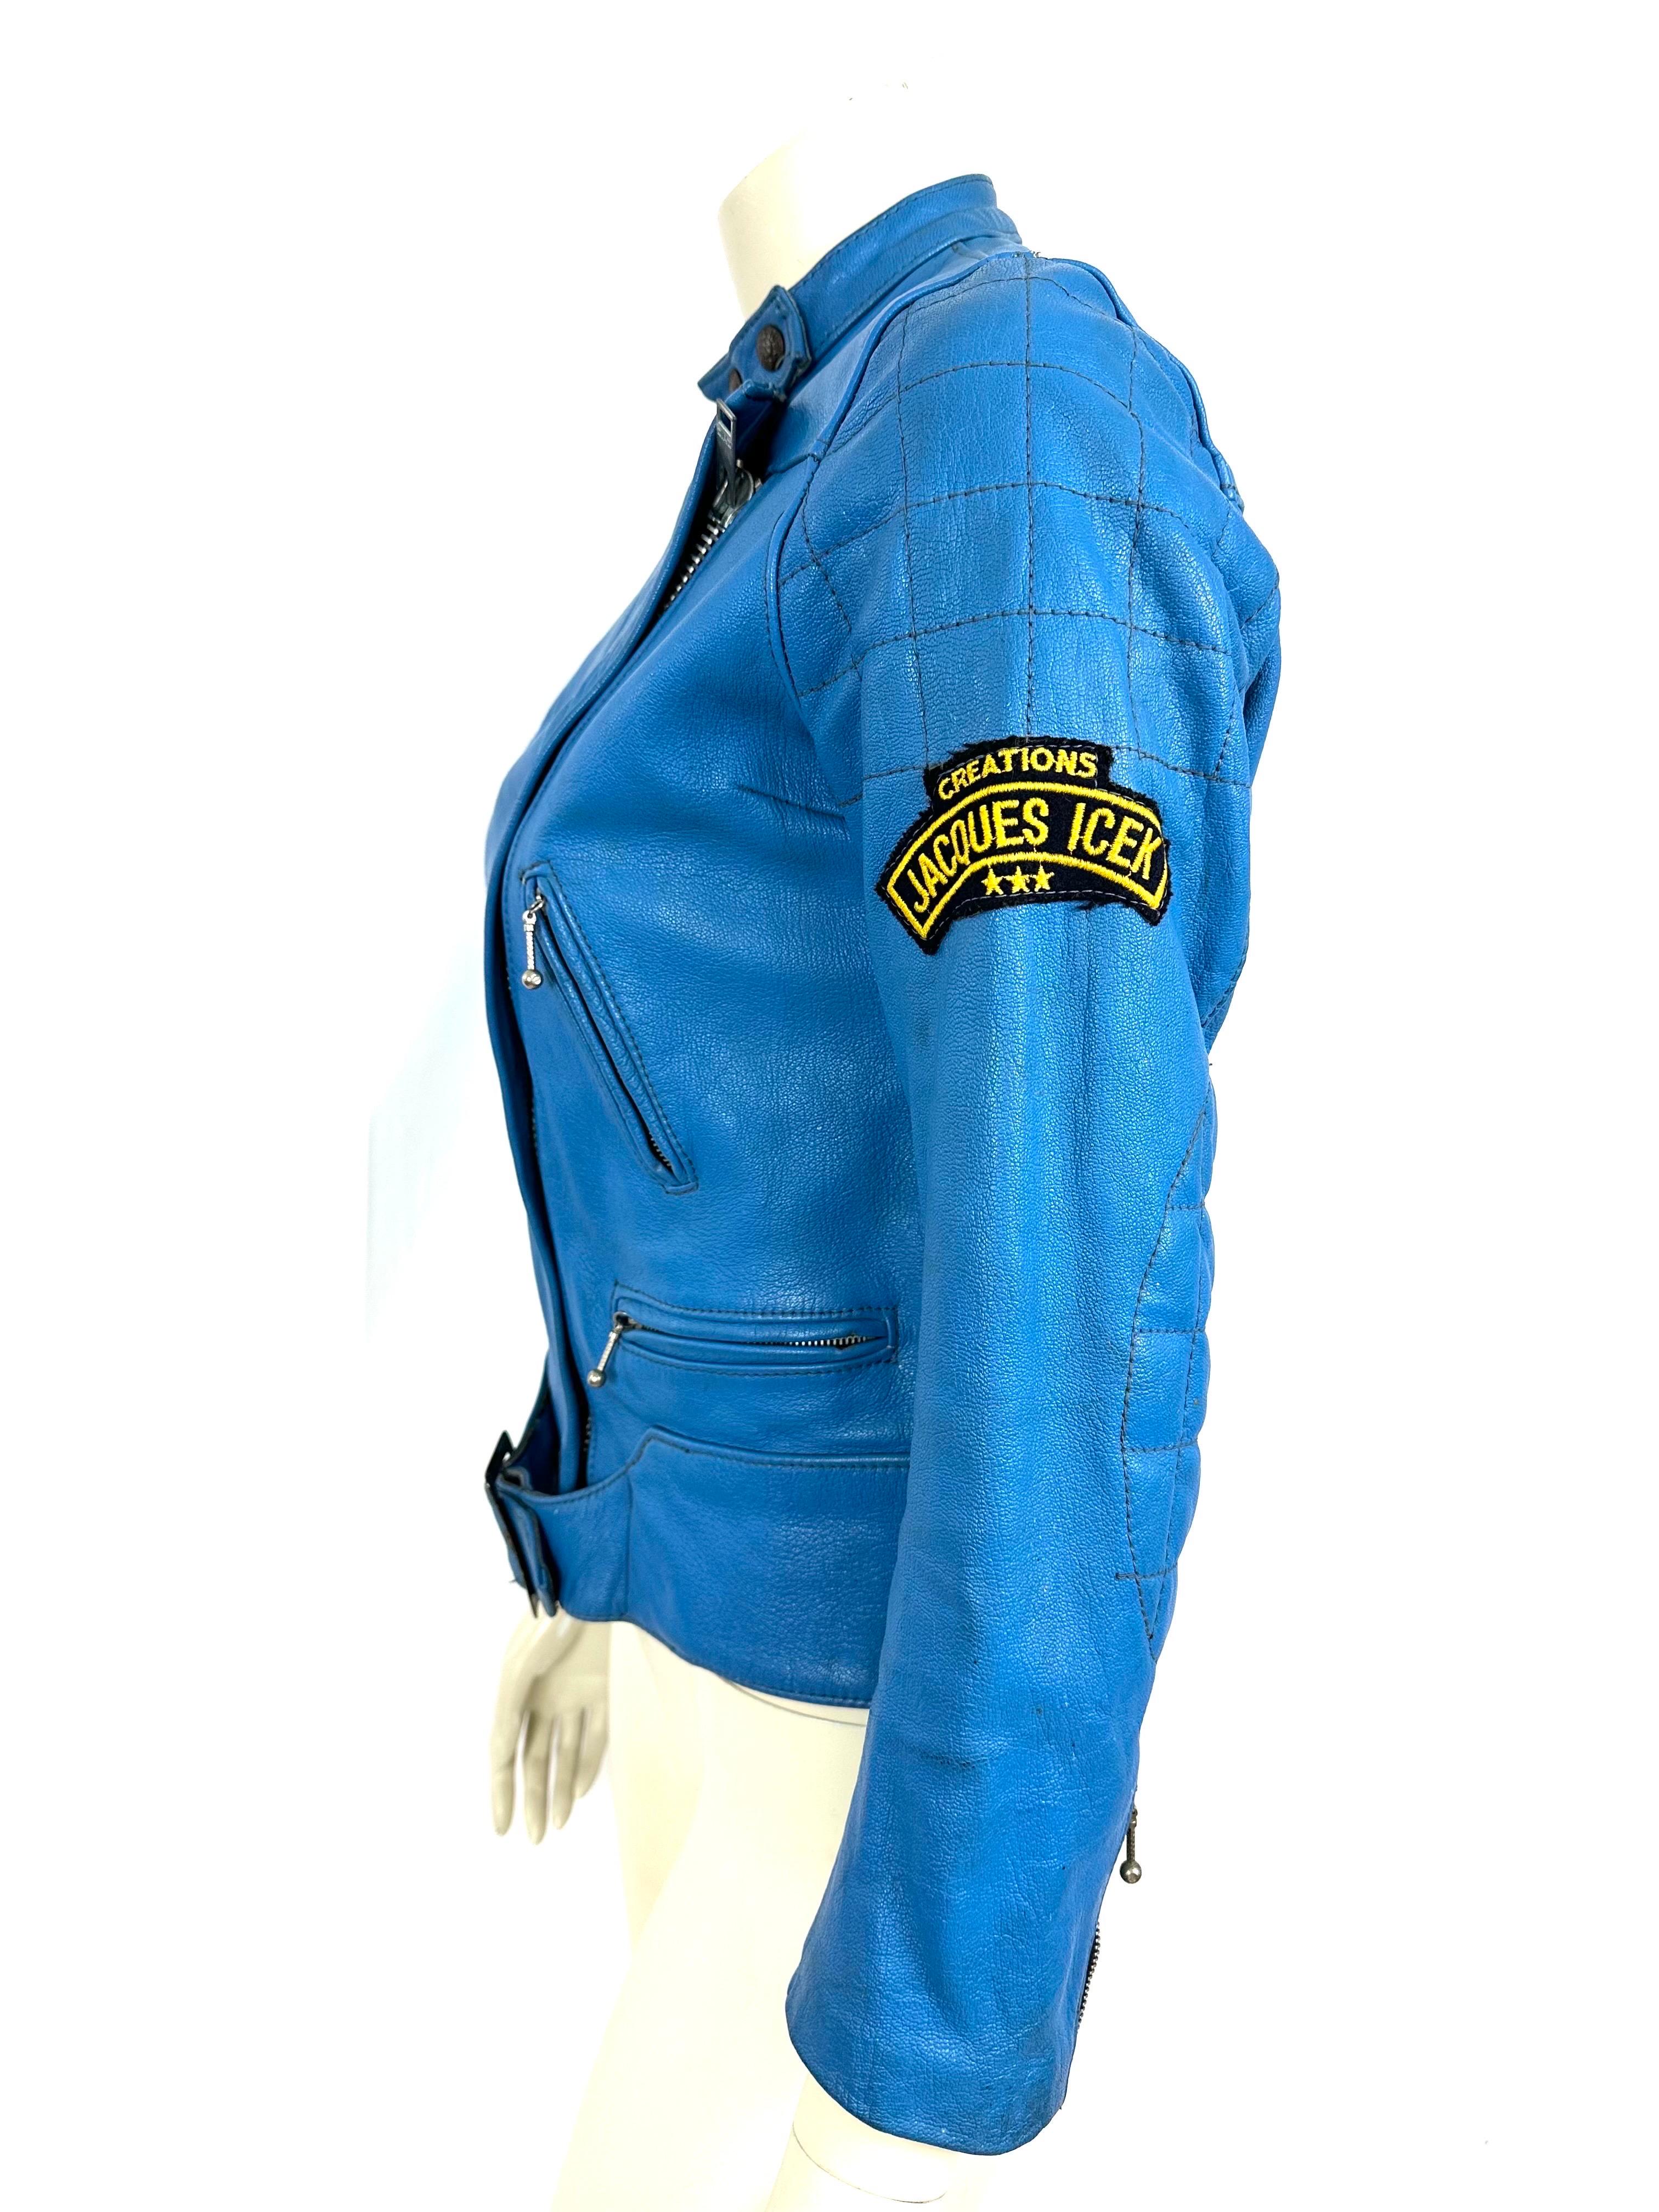 Blue Rare Jacques Icek biker leather jacket from the 70s For Sale